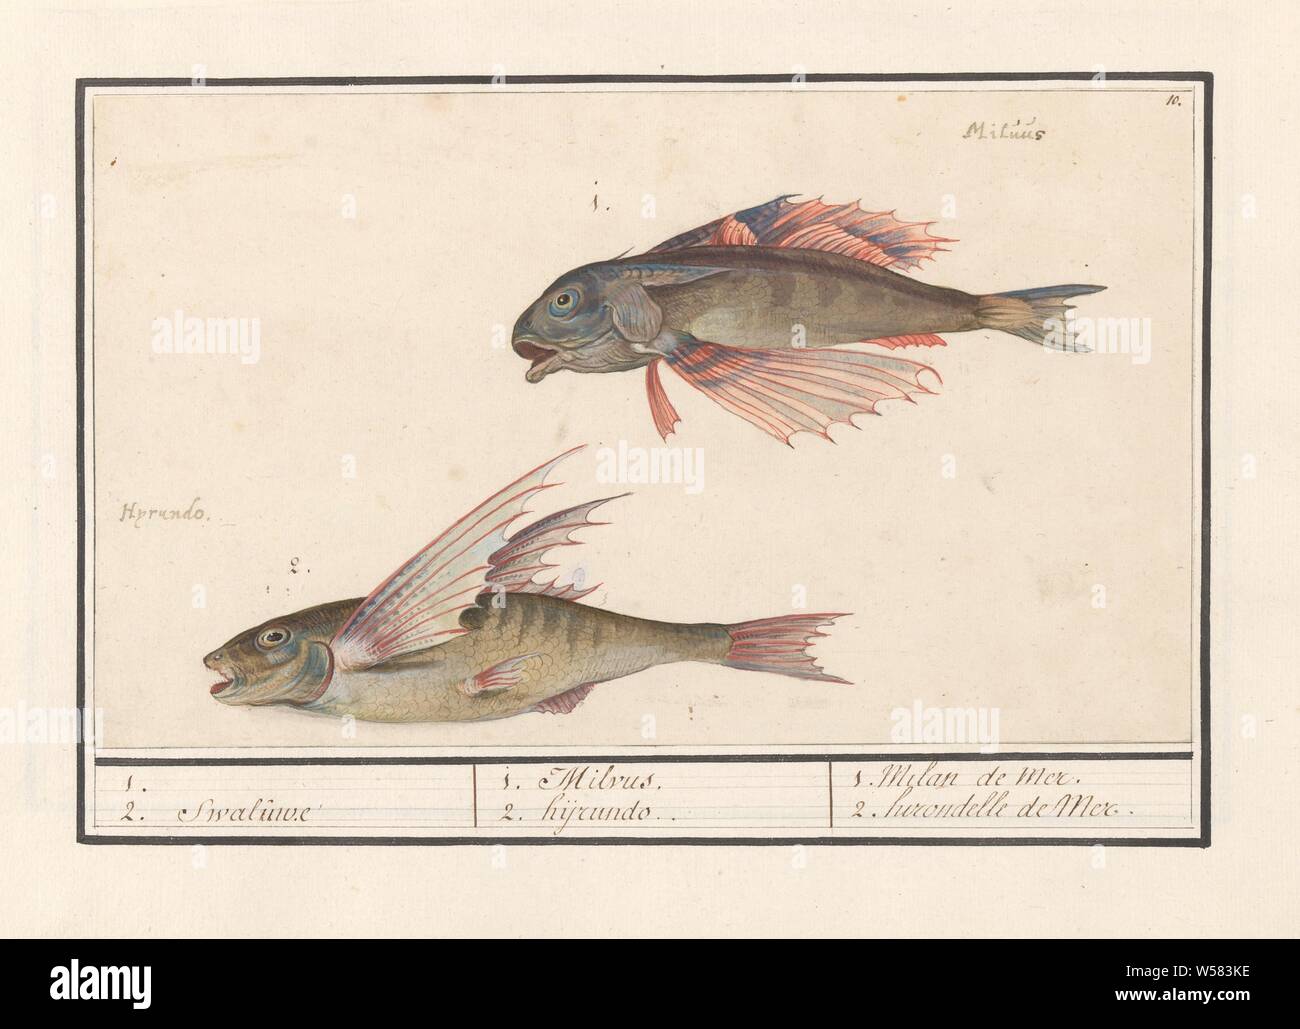 Red gurnard (Chelidonichthys lucerna) and flying fish (Exocoetidae), 1. 2. Swaluwe / 1. Milvus 2. hyrundo. / 1. Milan de mer 2. hirondelle de Mer (title on object), Red Gurnard and a flying fish. Numbered top right: 10. With the Latin names. Part of the sixth album with drawings of fish, shells and insects. Sixth of twelve albums with drawings of animals, birds and plants known around 1600, commissioned by Emperor Rudolf II. With explanations in Dutch, Latin and French, bony fishes (with NAME), Anselmus Boetius de Boodt, 1596 - 1610, paper, pencil, chalk, watercolor (paint), deck paint, ink Stock Photo